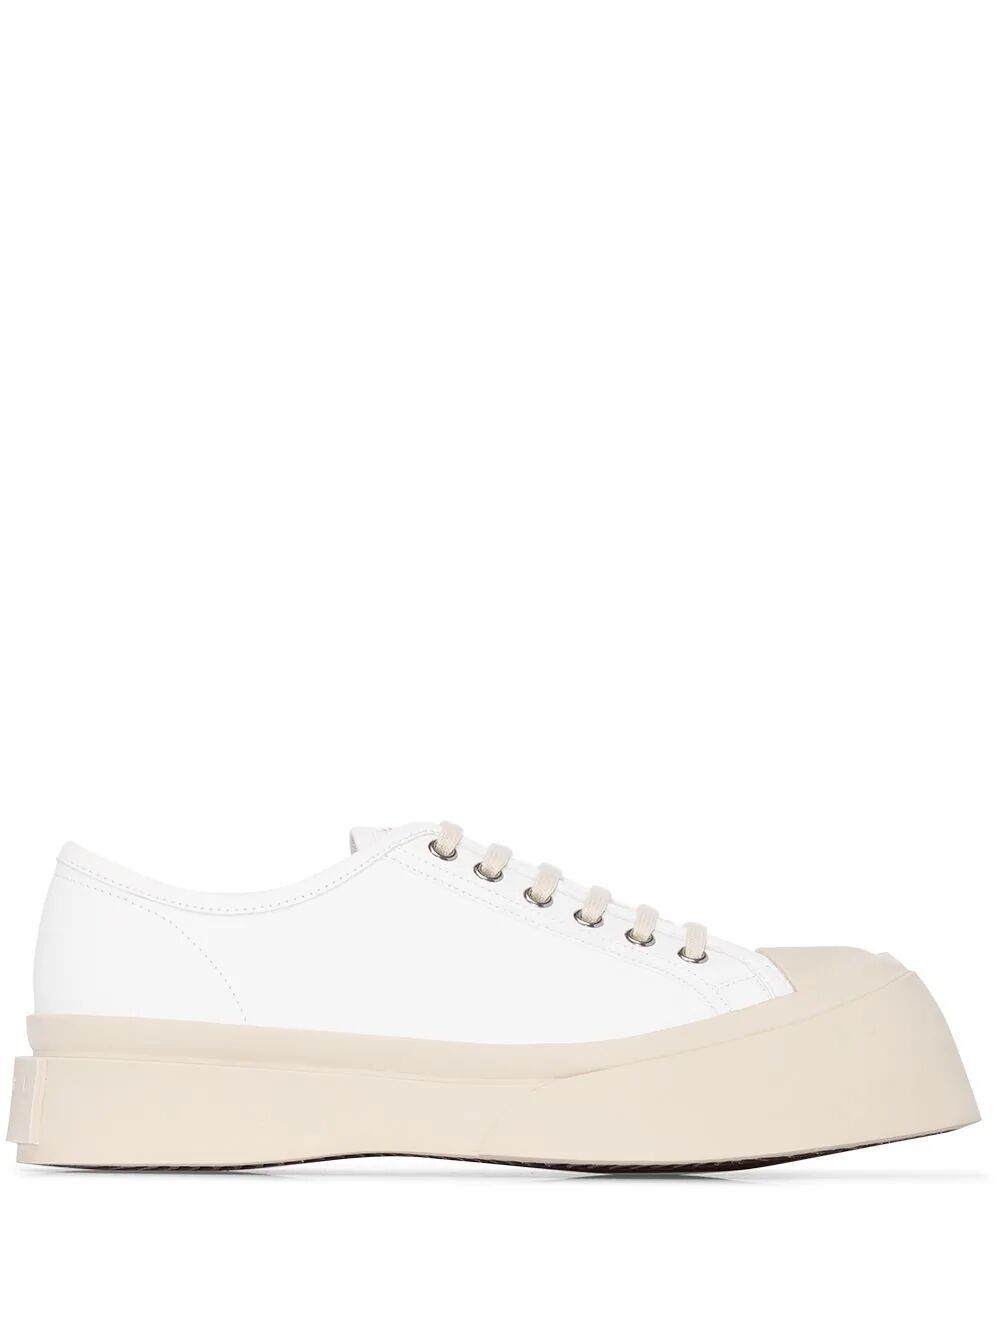 Shop Marni Laced Up Shoes In White